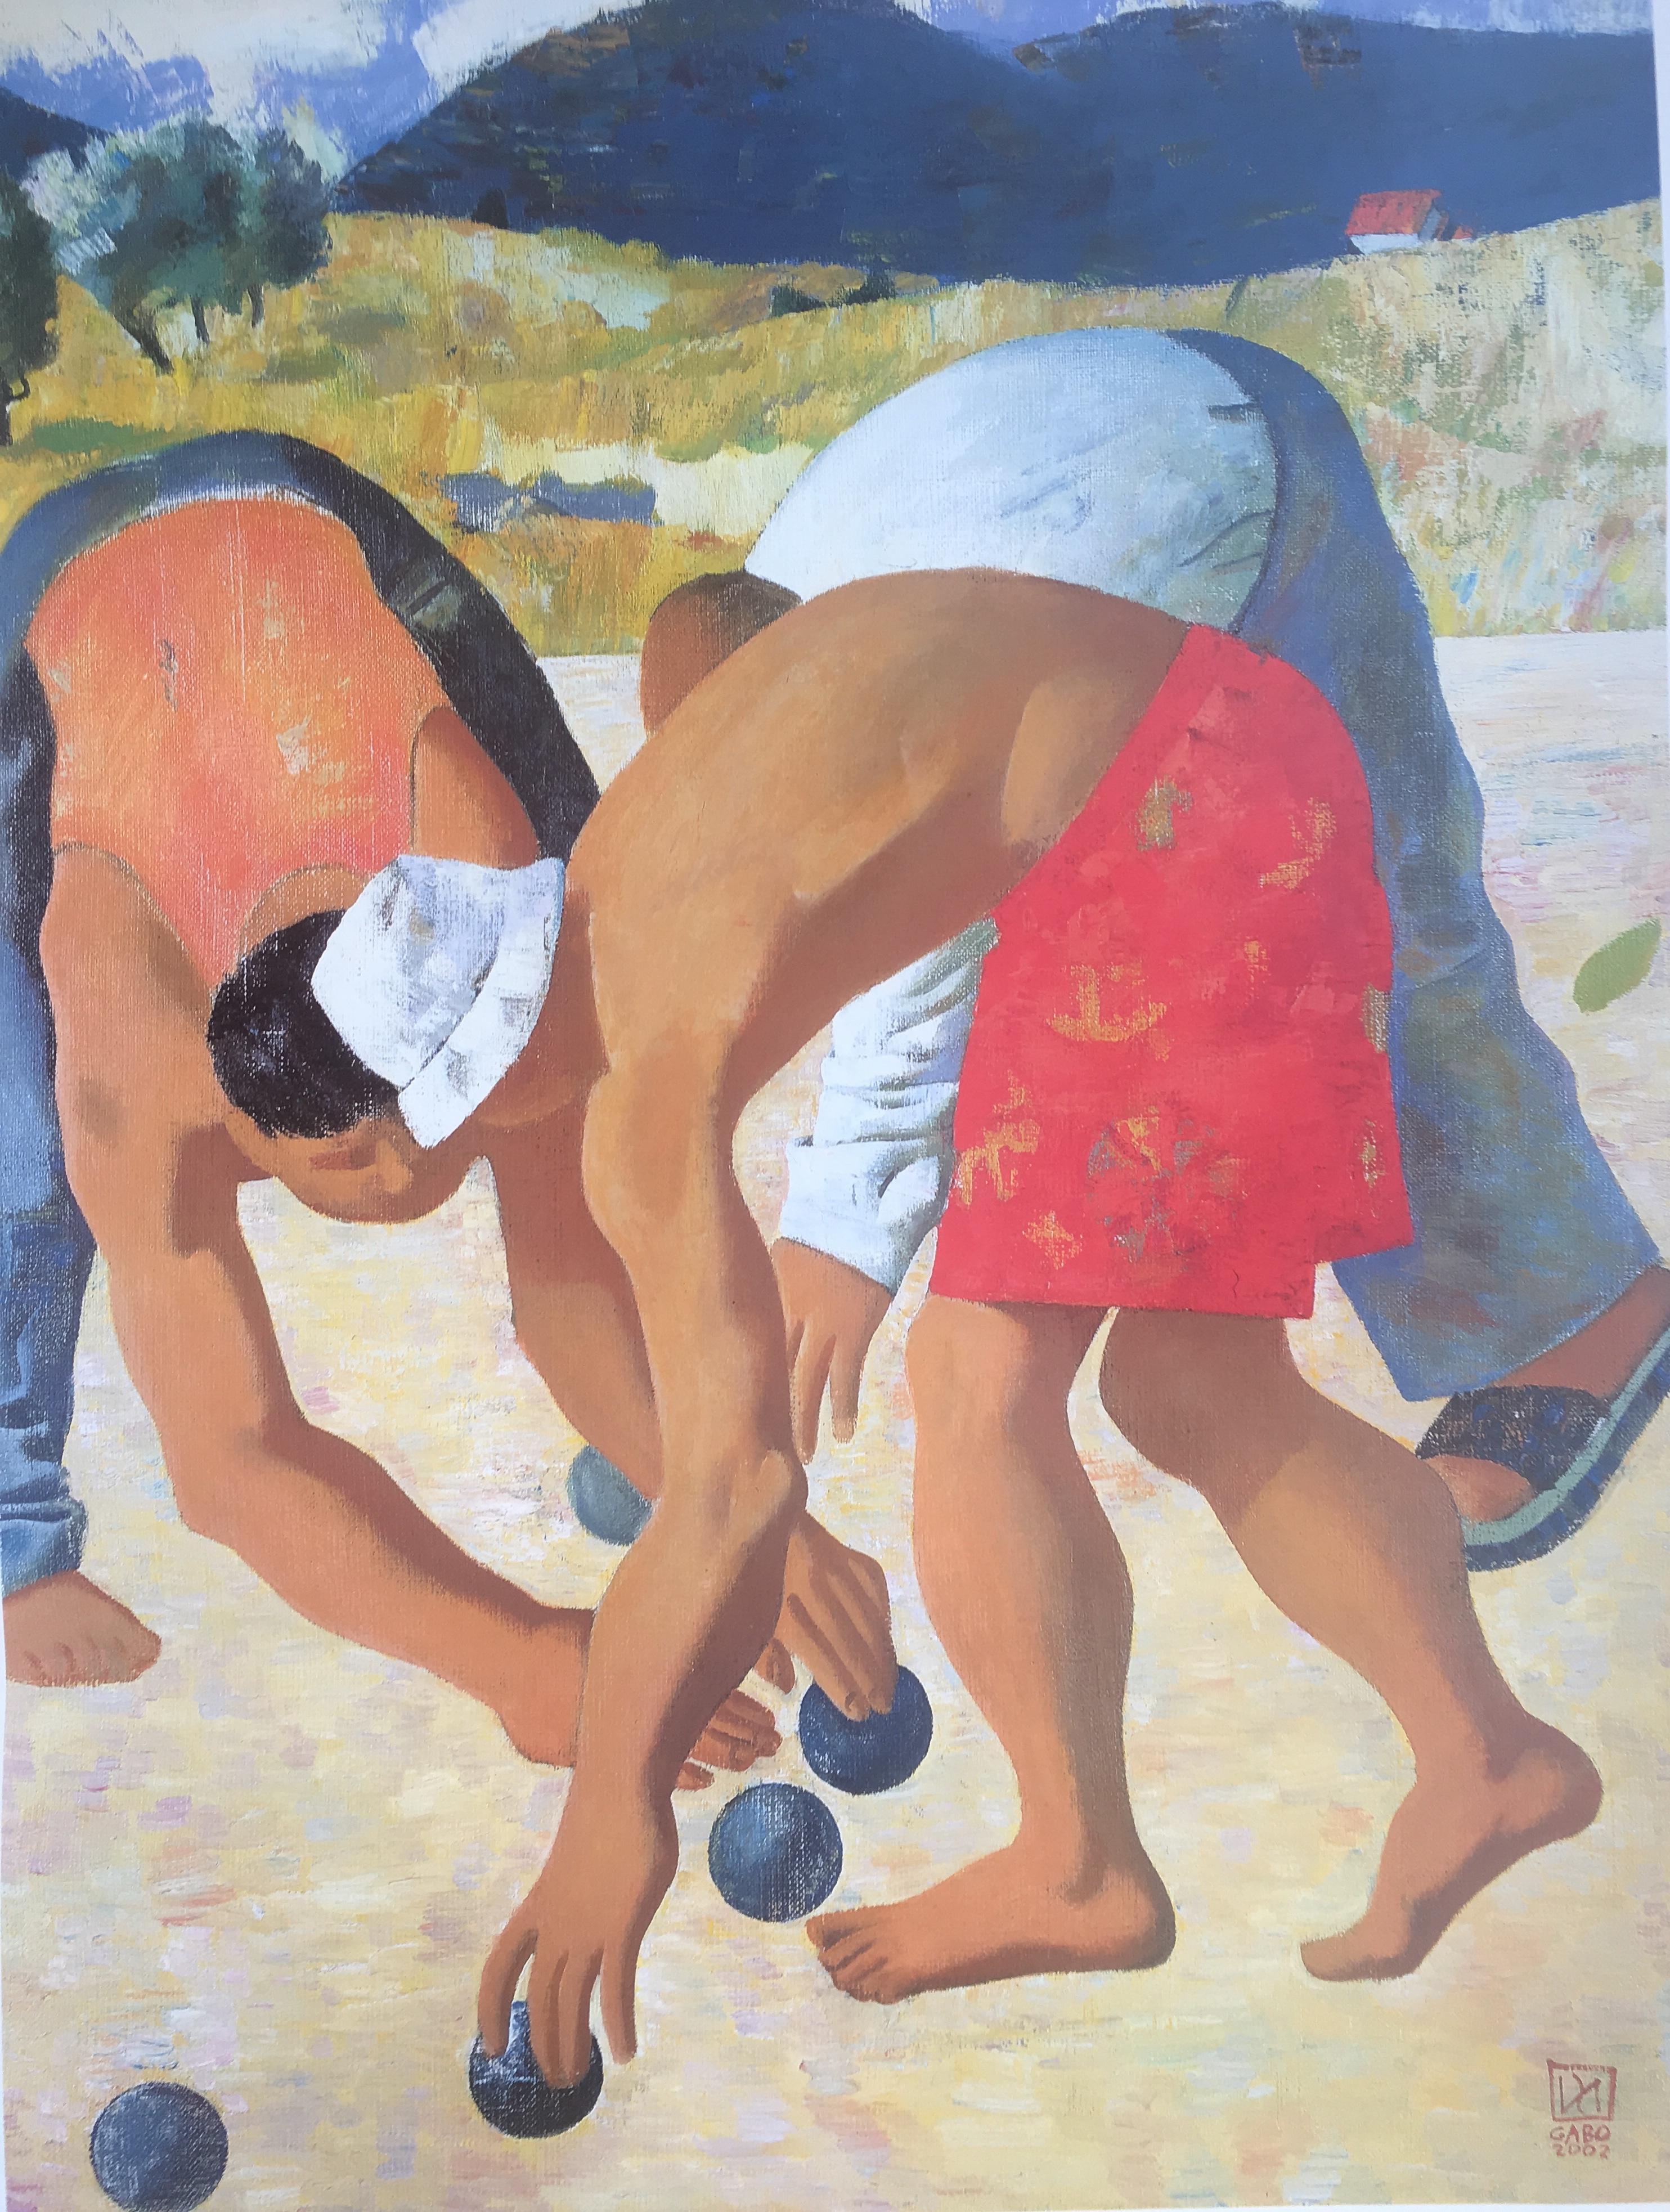 Original art poster depicting men playing petanque or boulle in Provence. Gabo is a Mexican artist living in Provence. 

This poster has very vivid colors, cheerful subject matter.